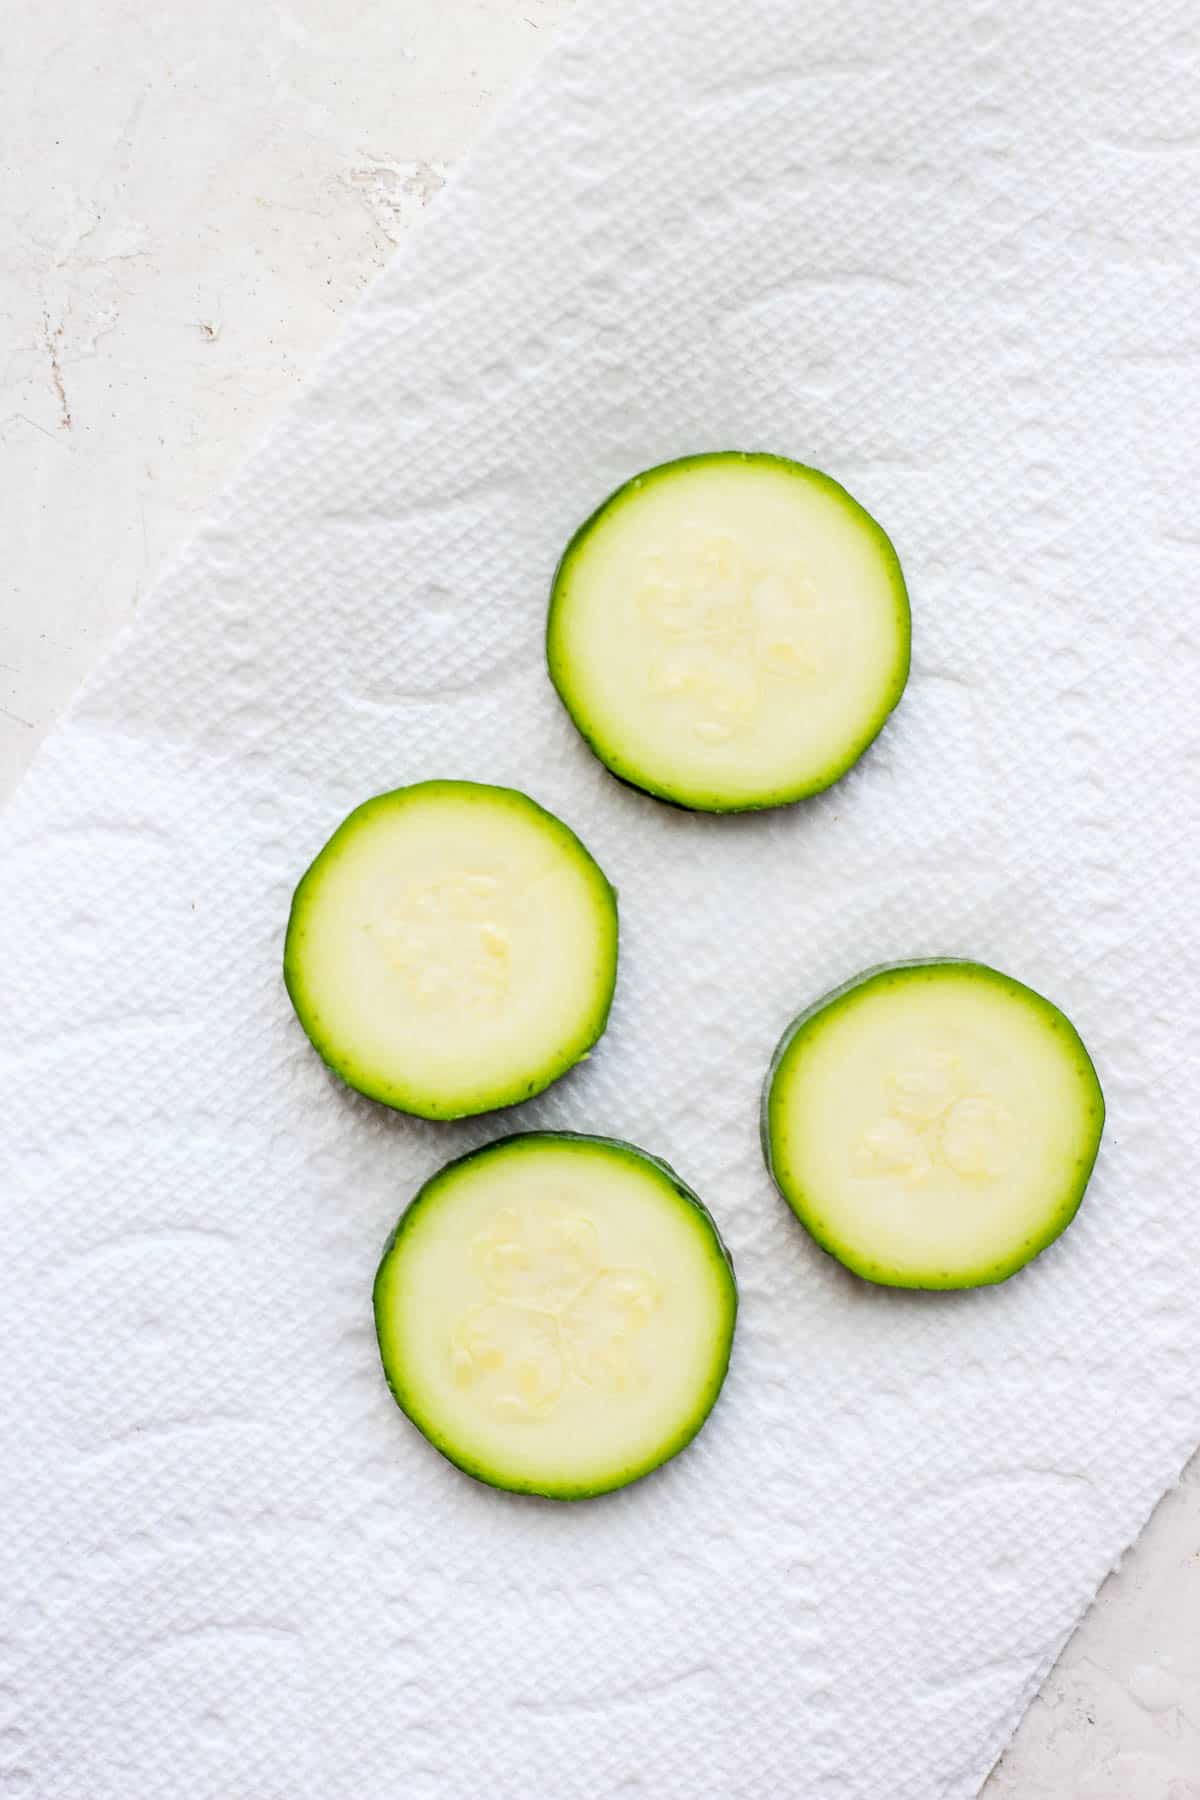 Zucchini slices on a piece of paper towel.